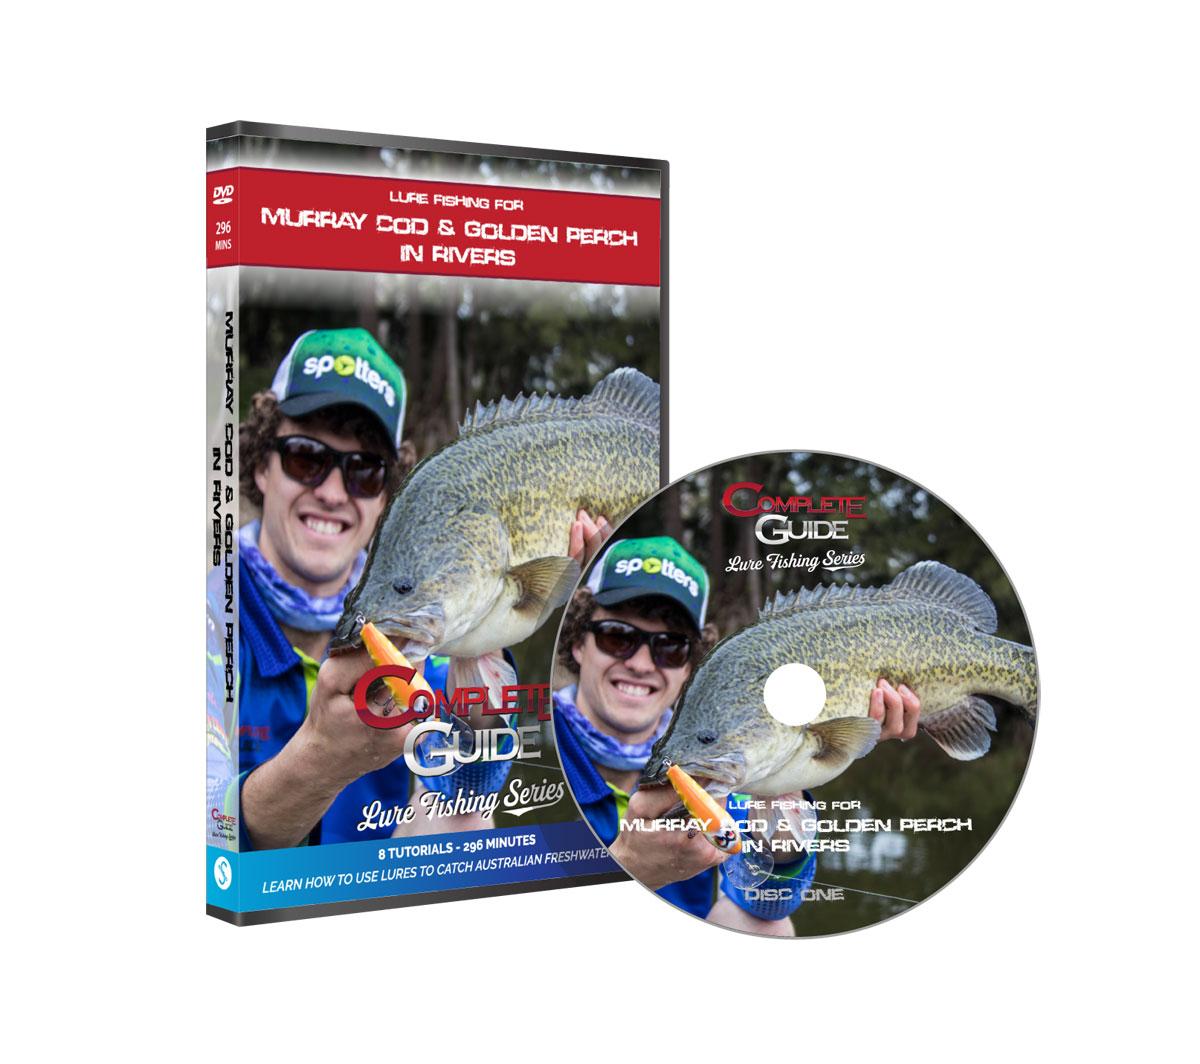 Murray Cod & Golden Perch in Rivers - Complete Guide DVD Series-0